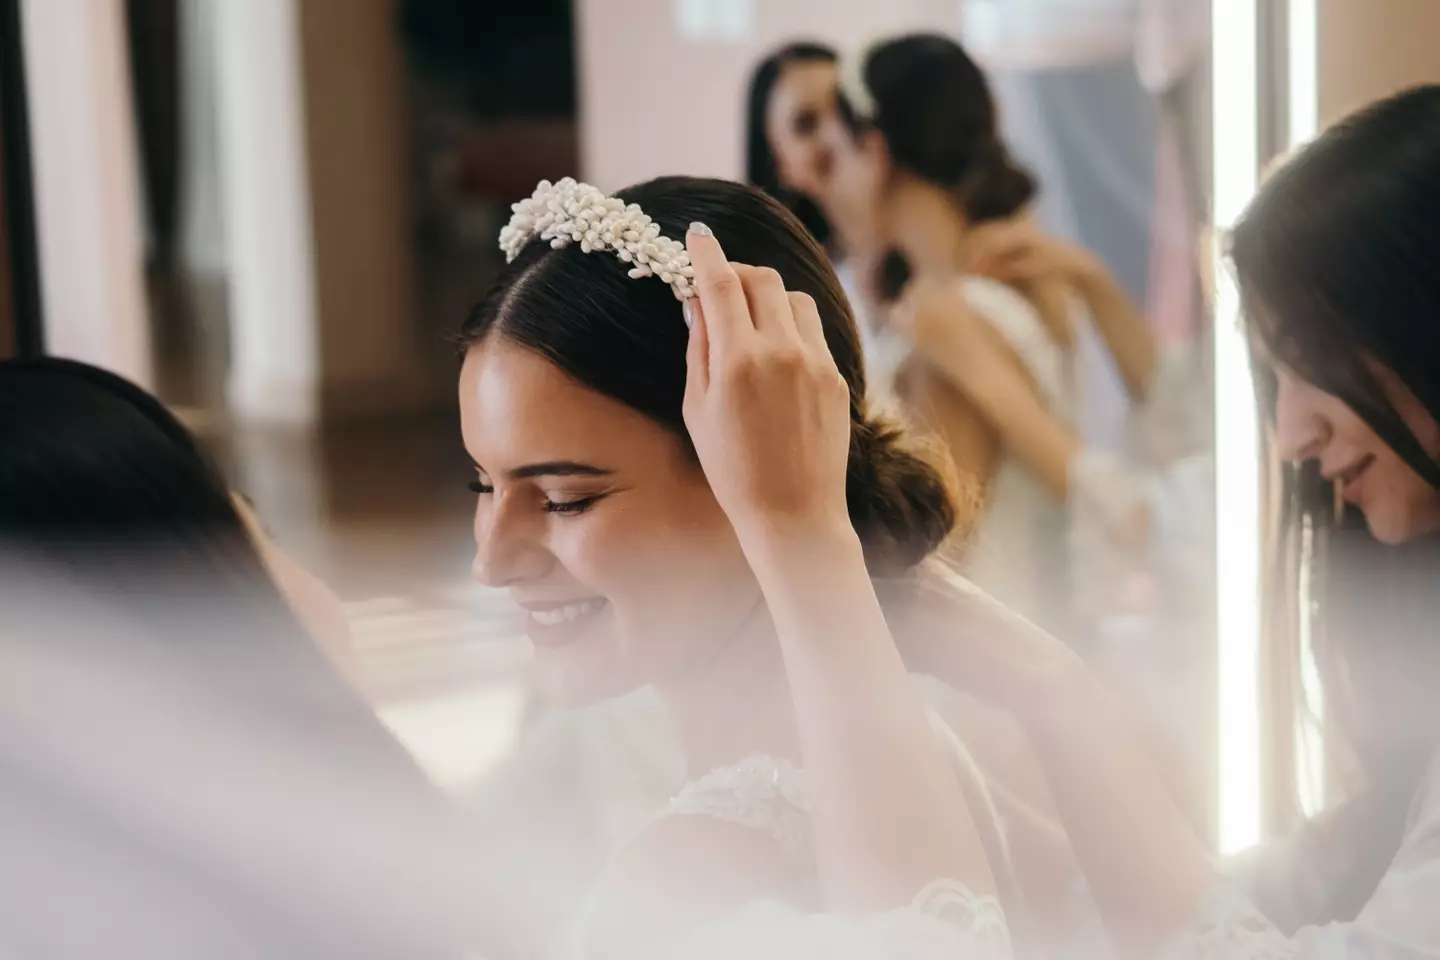 "Everyone in the wedding party must have shorter hair than the bride by at least six inches" (stock image).